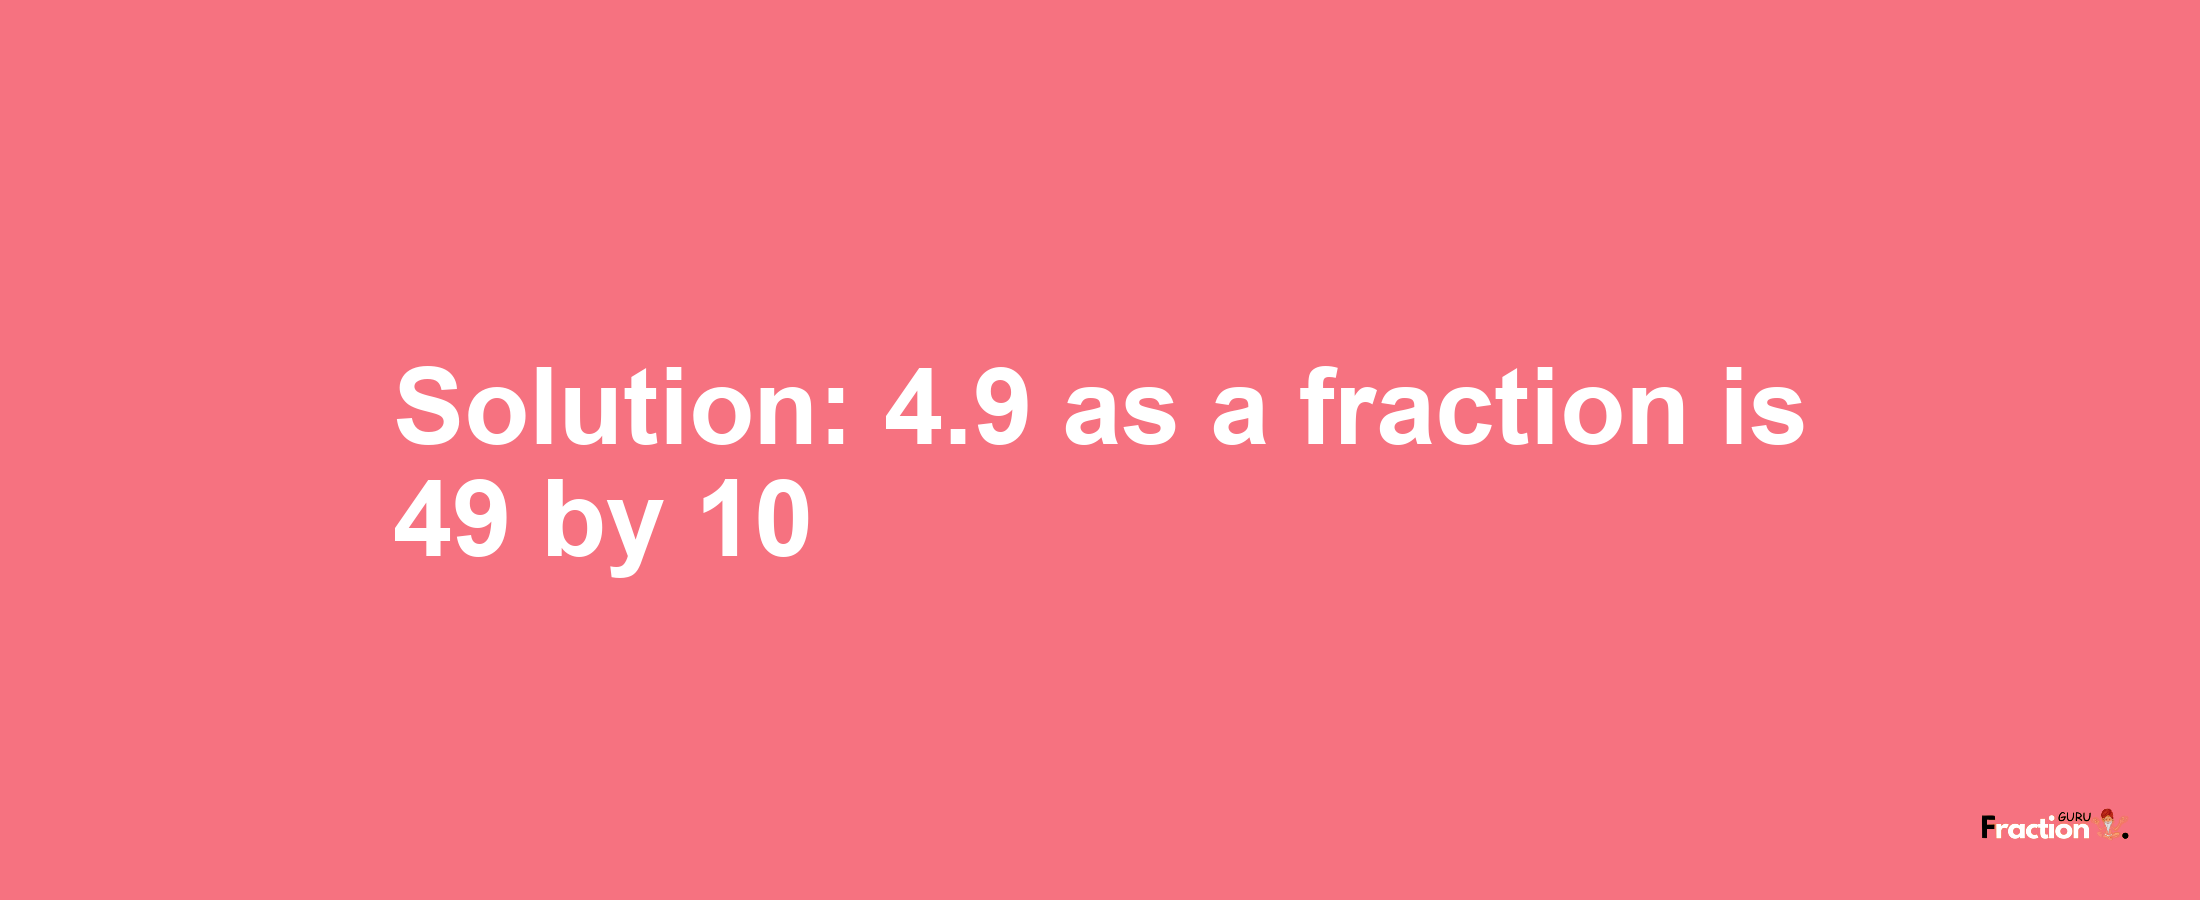 Solution:4.9 as a fraction is 49/10